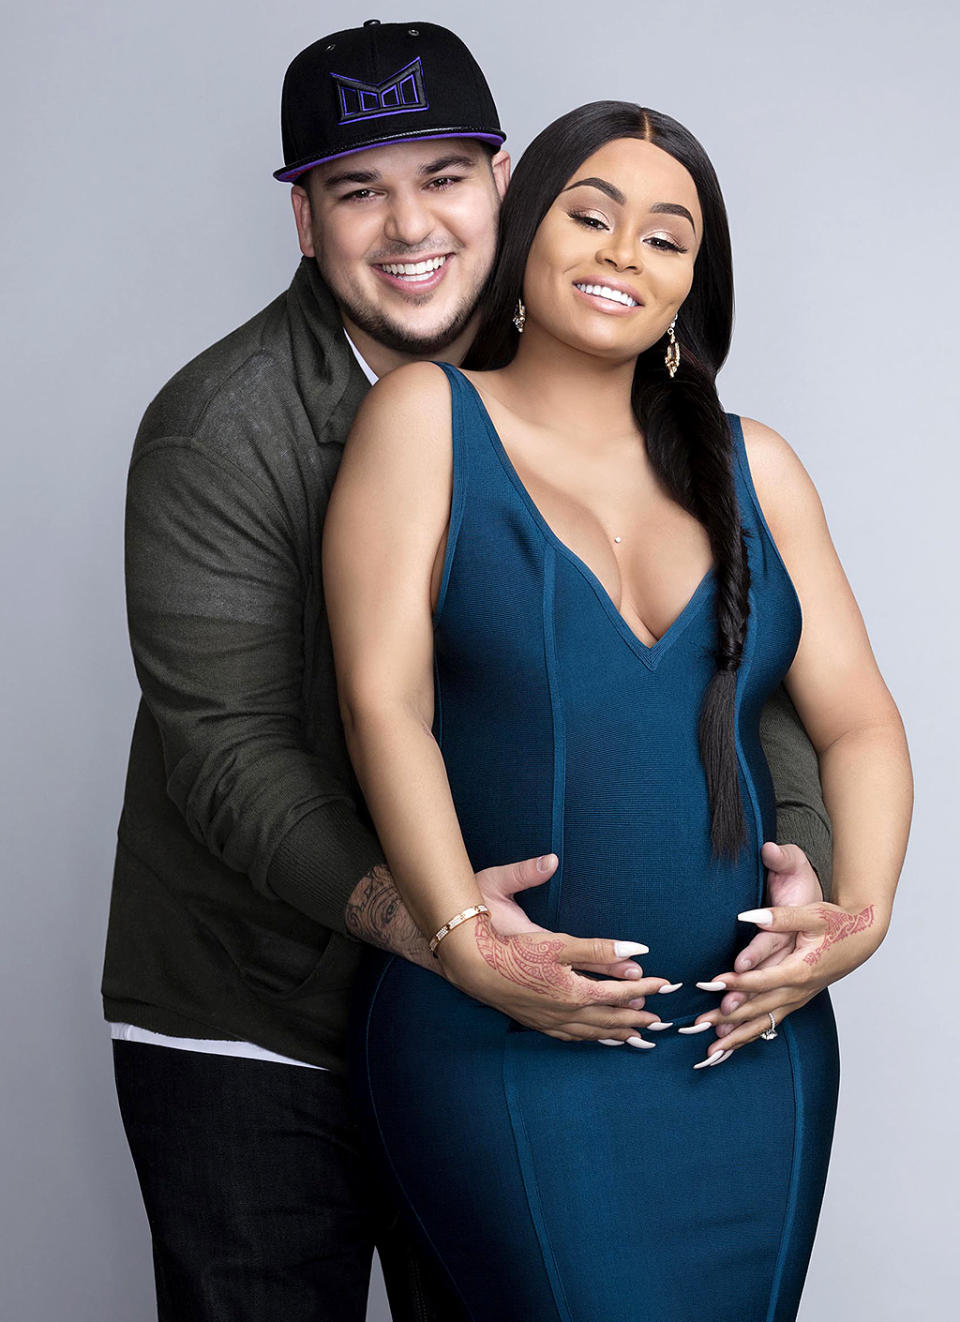 15. Blac Chyna and Rob Kardashian Get Engaged and Welcome a Baby